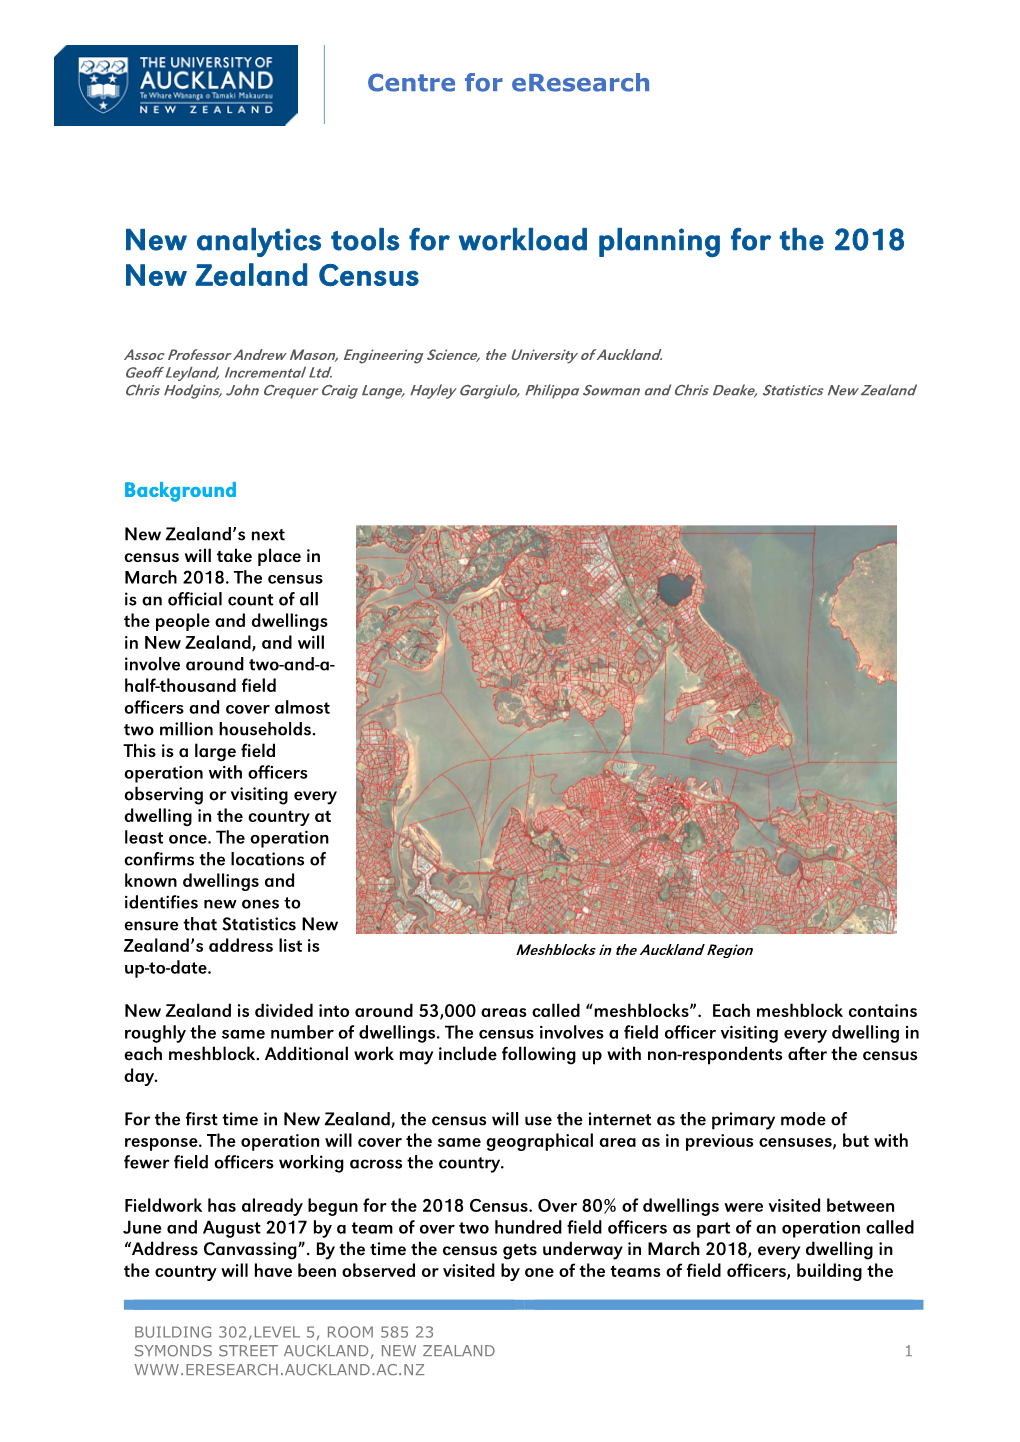 New Analytics Tools for Workload Planning for the 2018 New Zealand Census